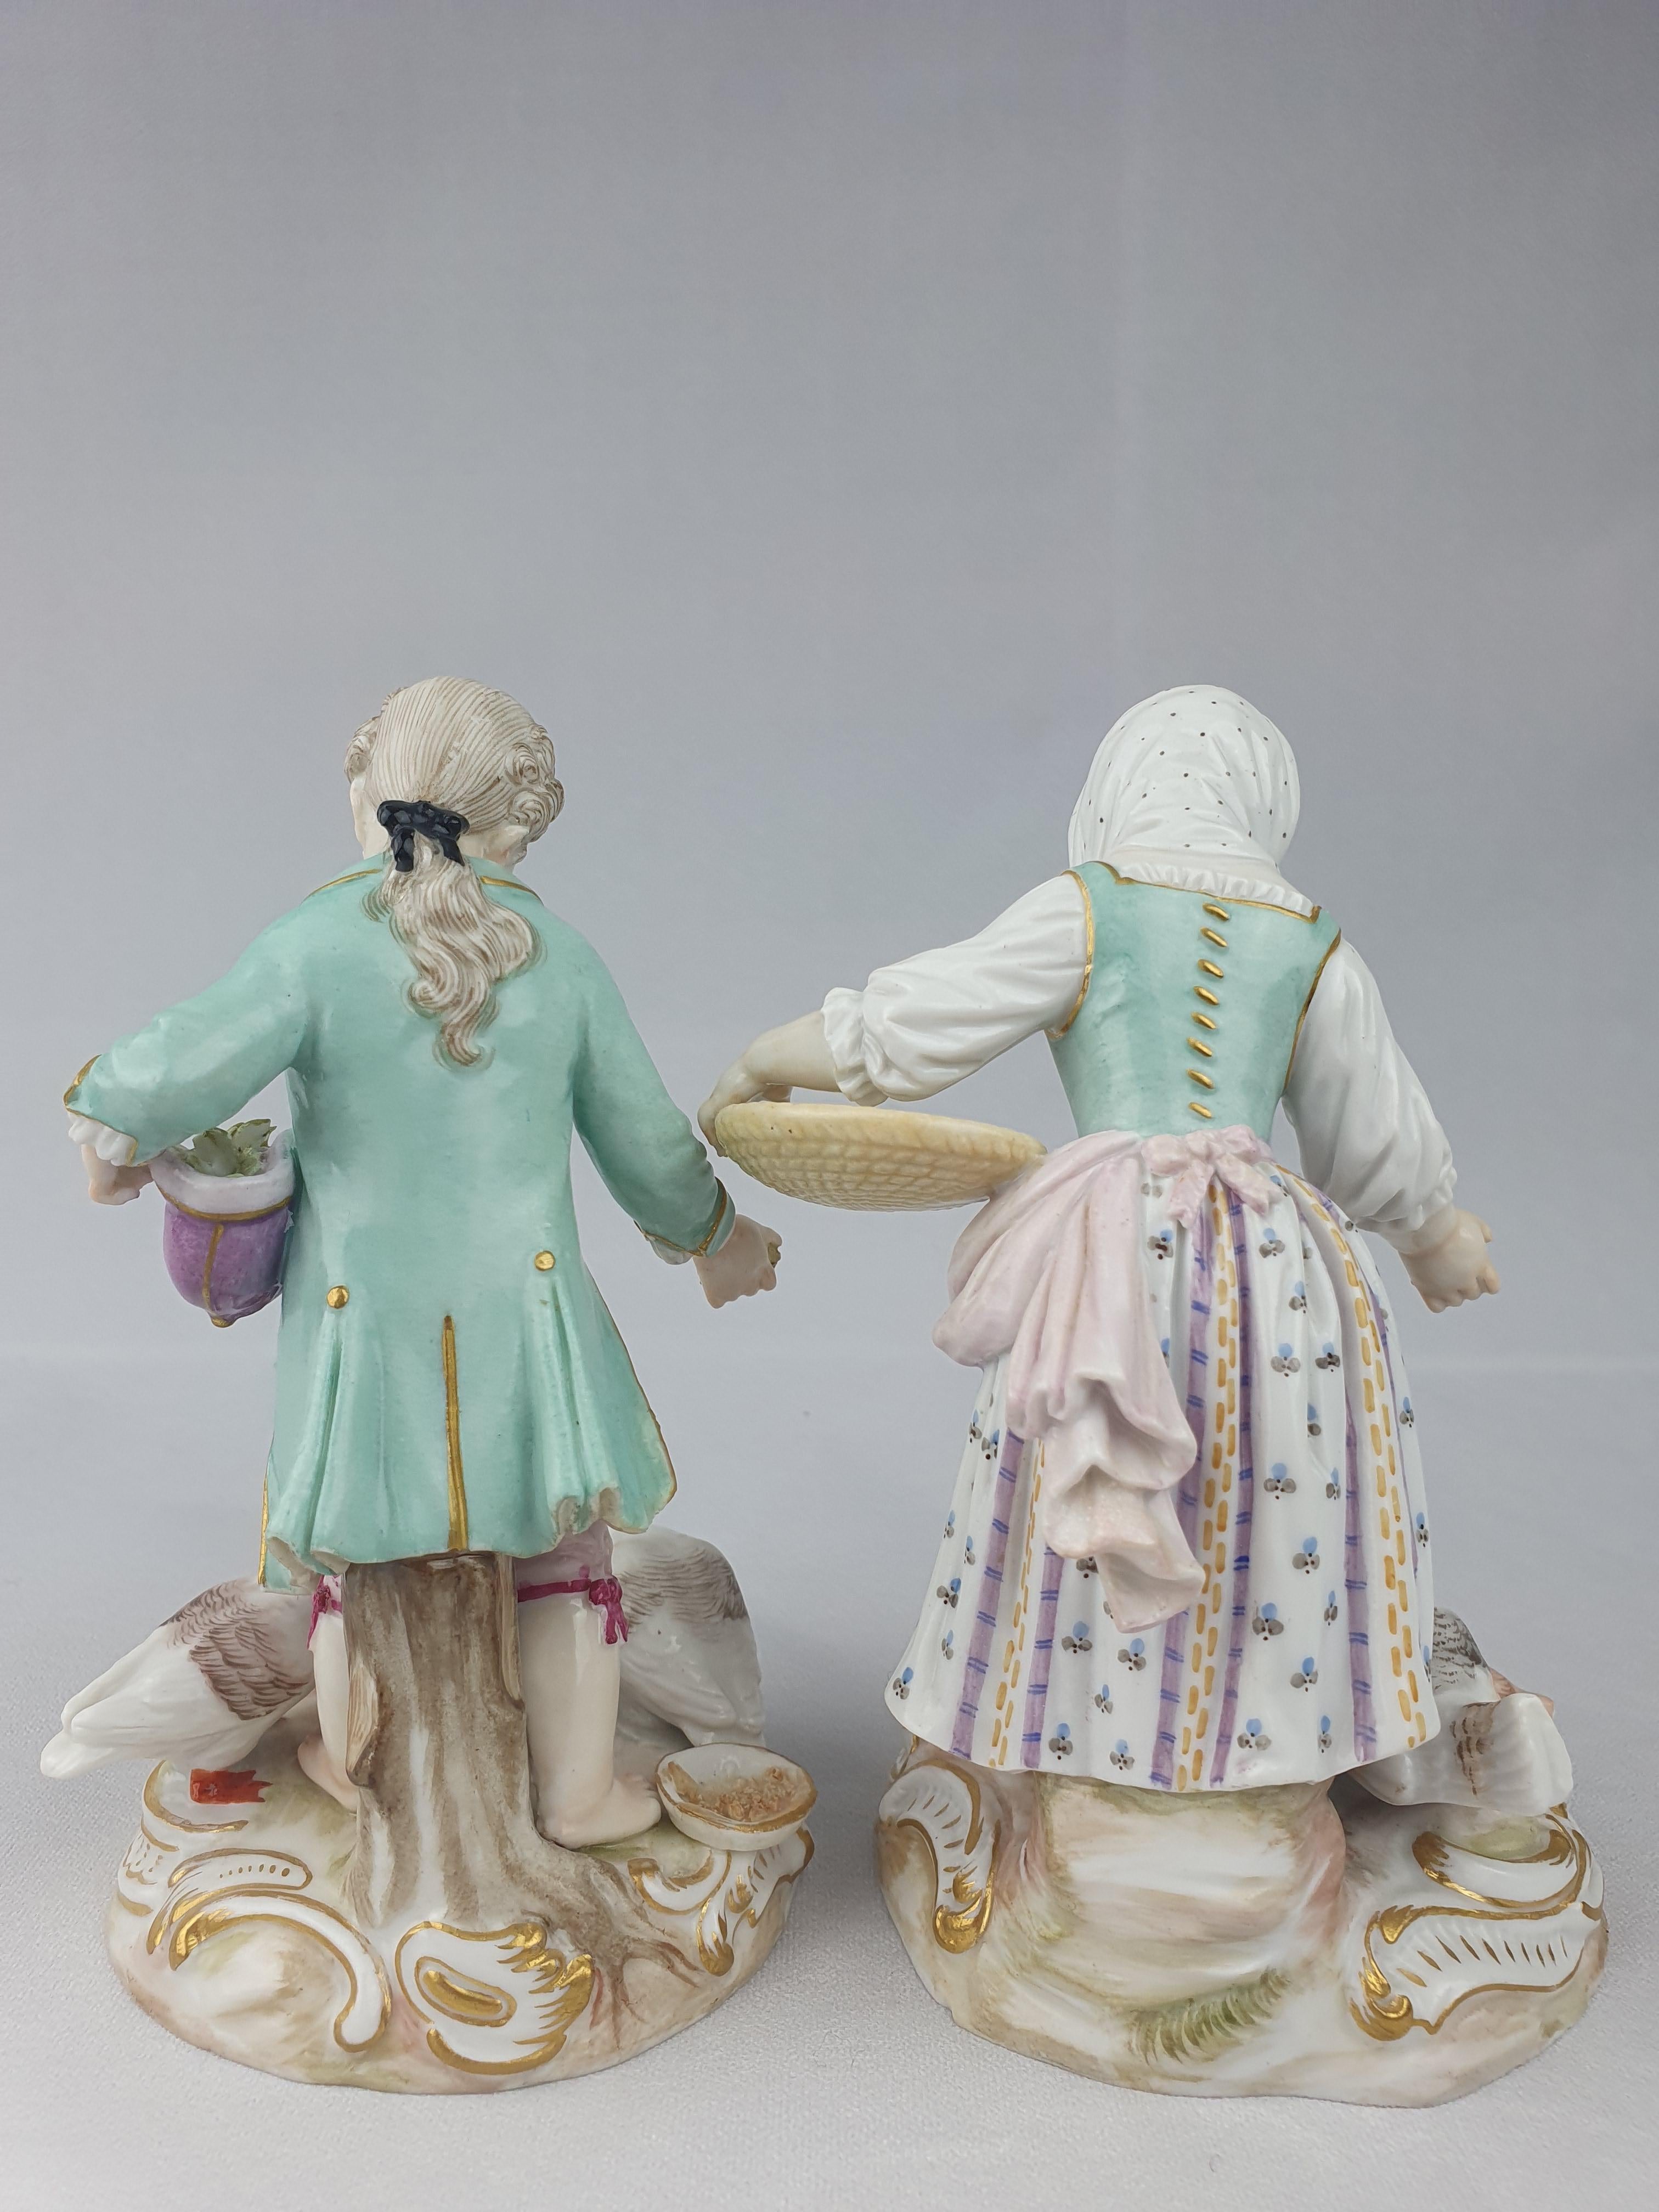 Pair of Meissen Figures circa 1870. The girl feeding chickens, the boy feeding geese. The pair first modelled by J.J Kaendler in 1761. Both figures in complementing colours of teal and pink. Painted detail on both figures is of high quality.

Both